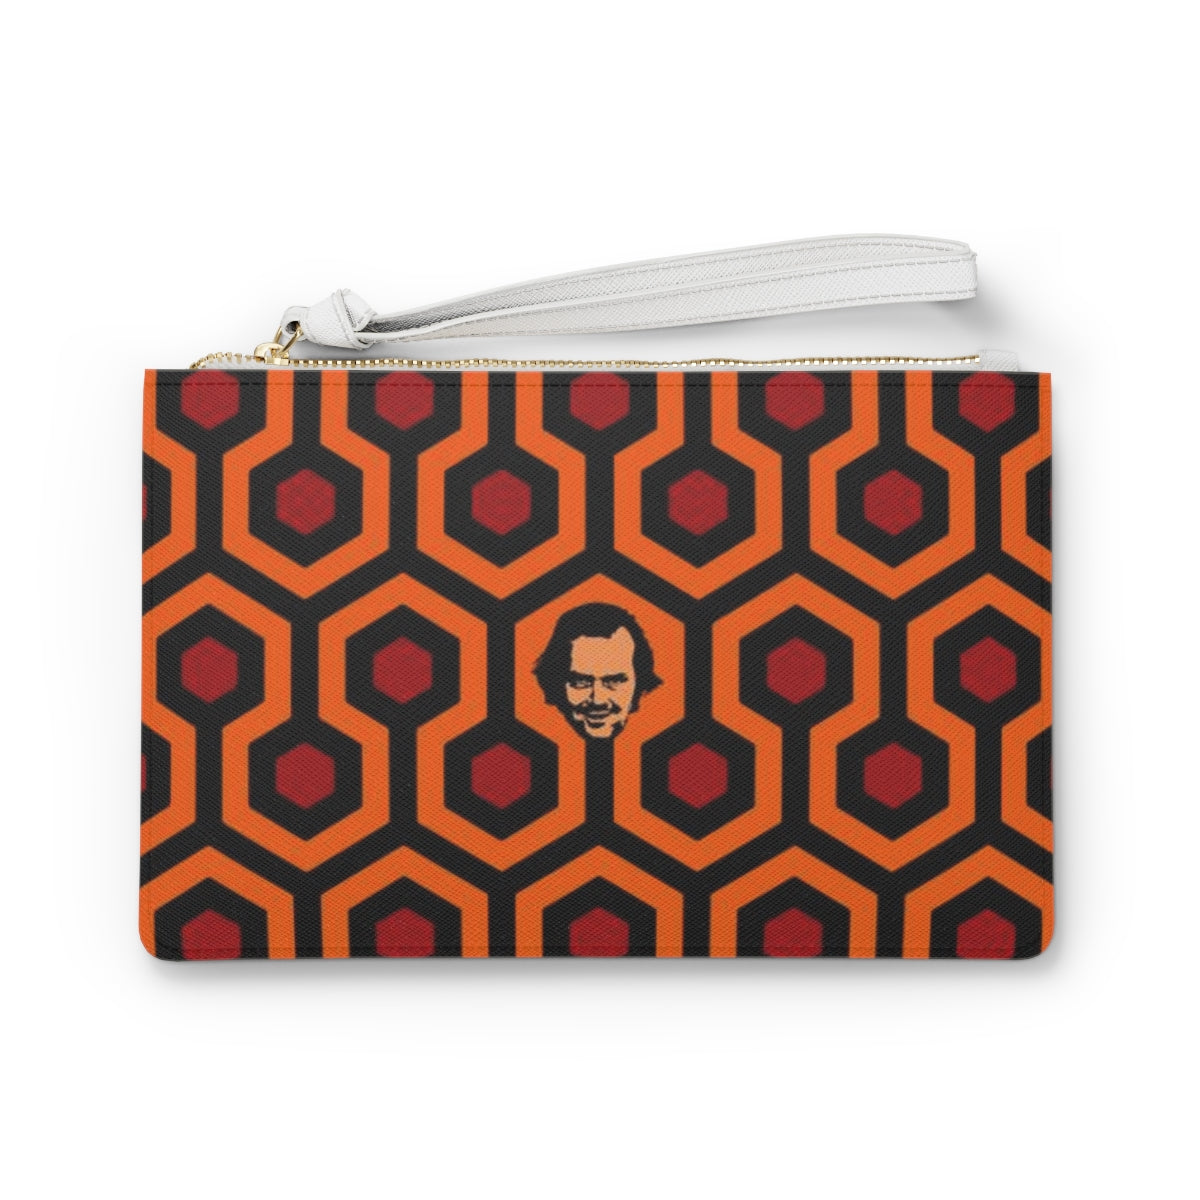 Redrum 237 Smiley face - The Shining | Wristlet Wallet Clutch Bag